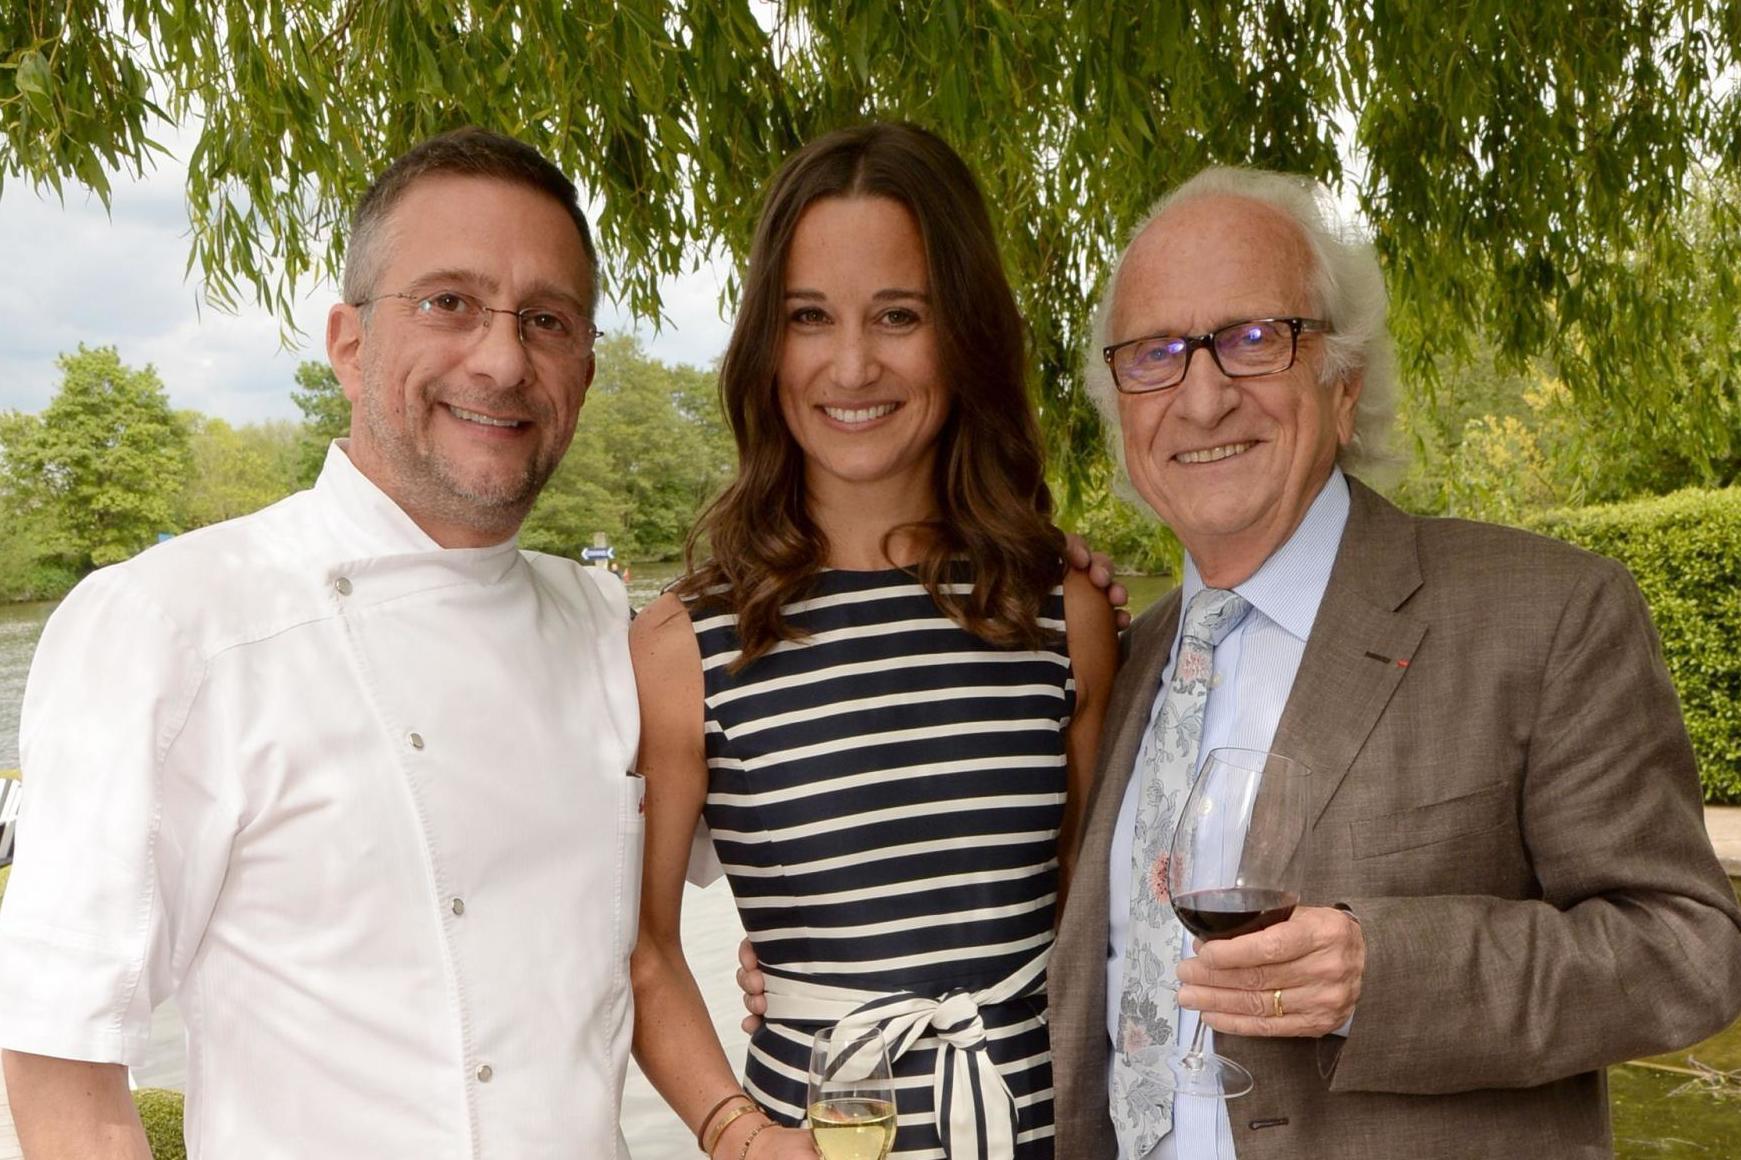 Michel Roux (right) pictured at The Waterside Inn with Pippa Middleton and Alain Roux